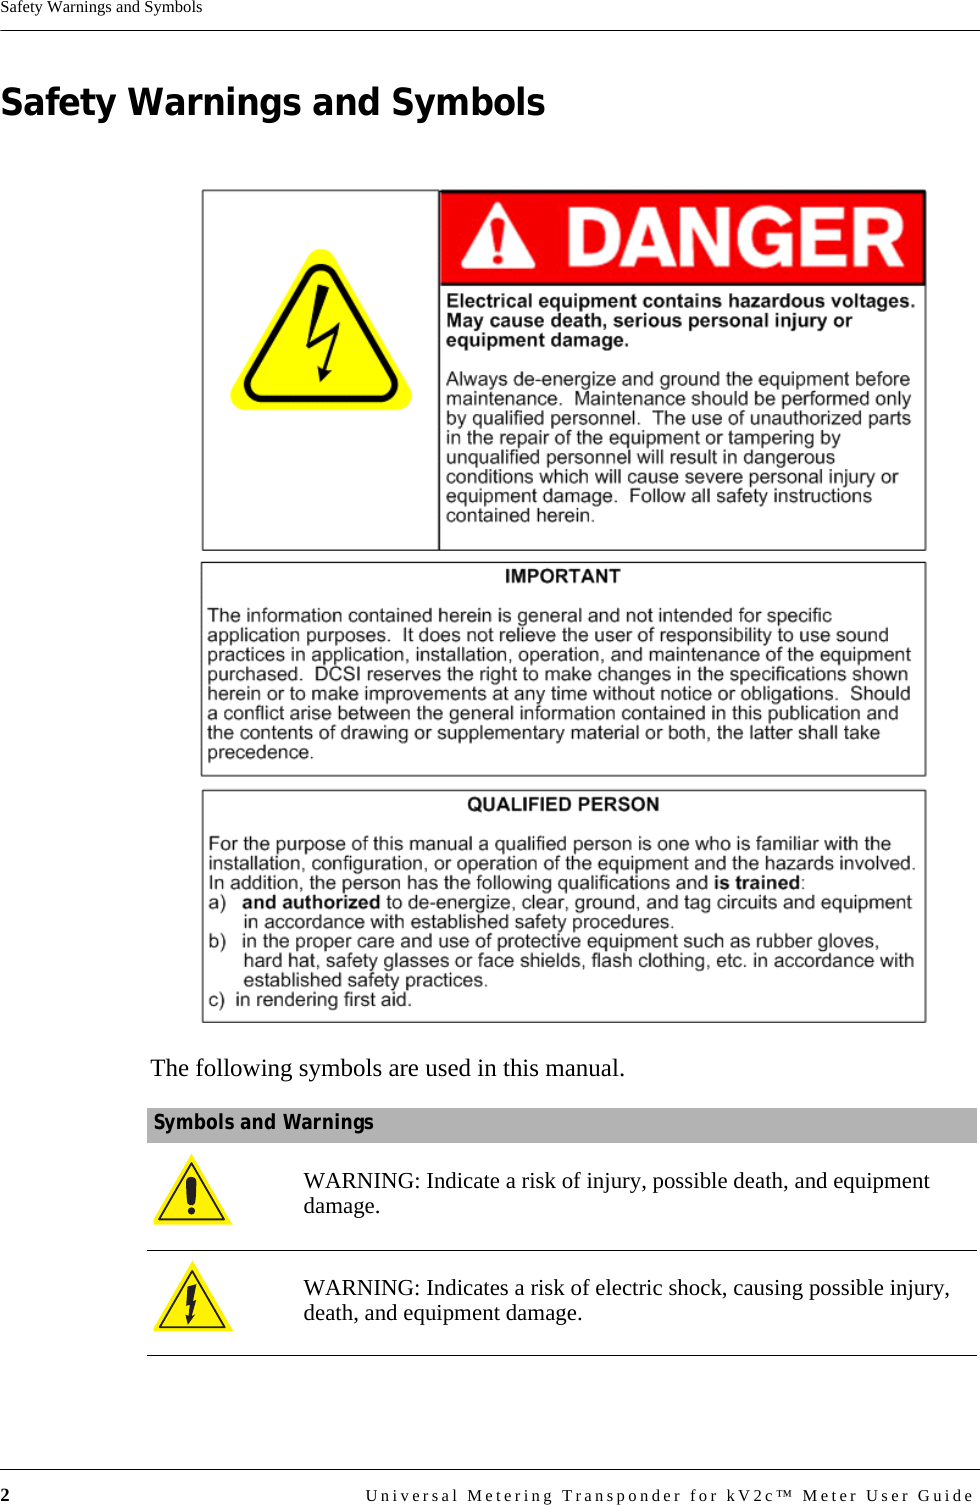 2Universal Metering Transponder for kV2c™ Meter User GuideSafety Warnings and SymbolsSafety Warnings and SymbolsThe following symbols are used in this manual.Symbols and WarningsWARNING: Indicate a risk of injury, possible death, and equipment damage.WARNING: Indicates a risk of electric shock, causing possible injury, death, and equipment damage.